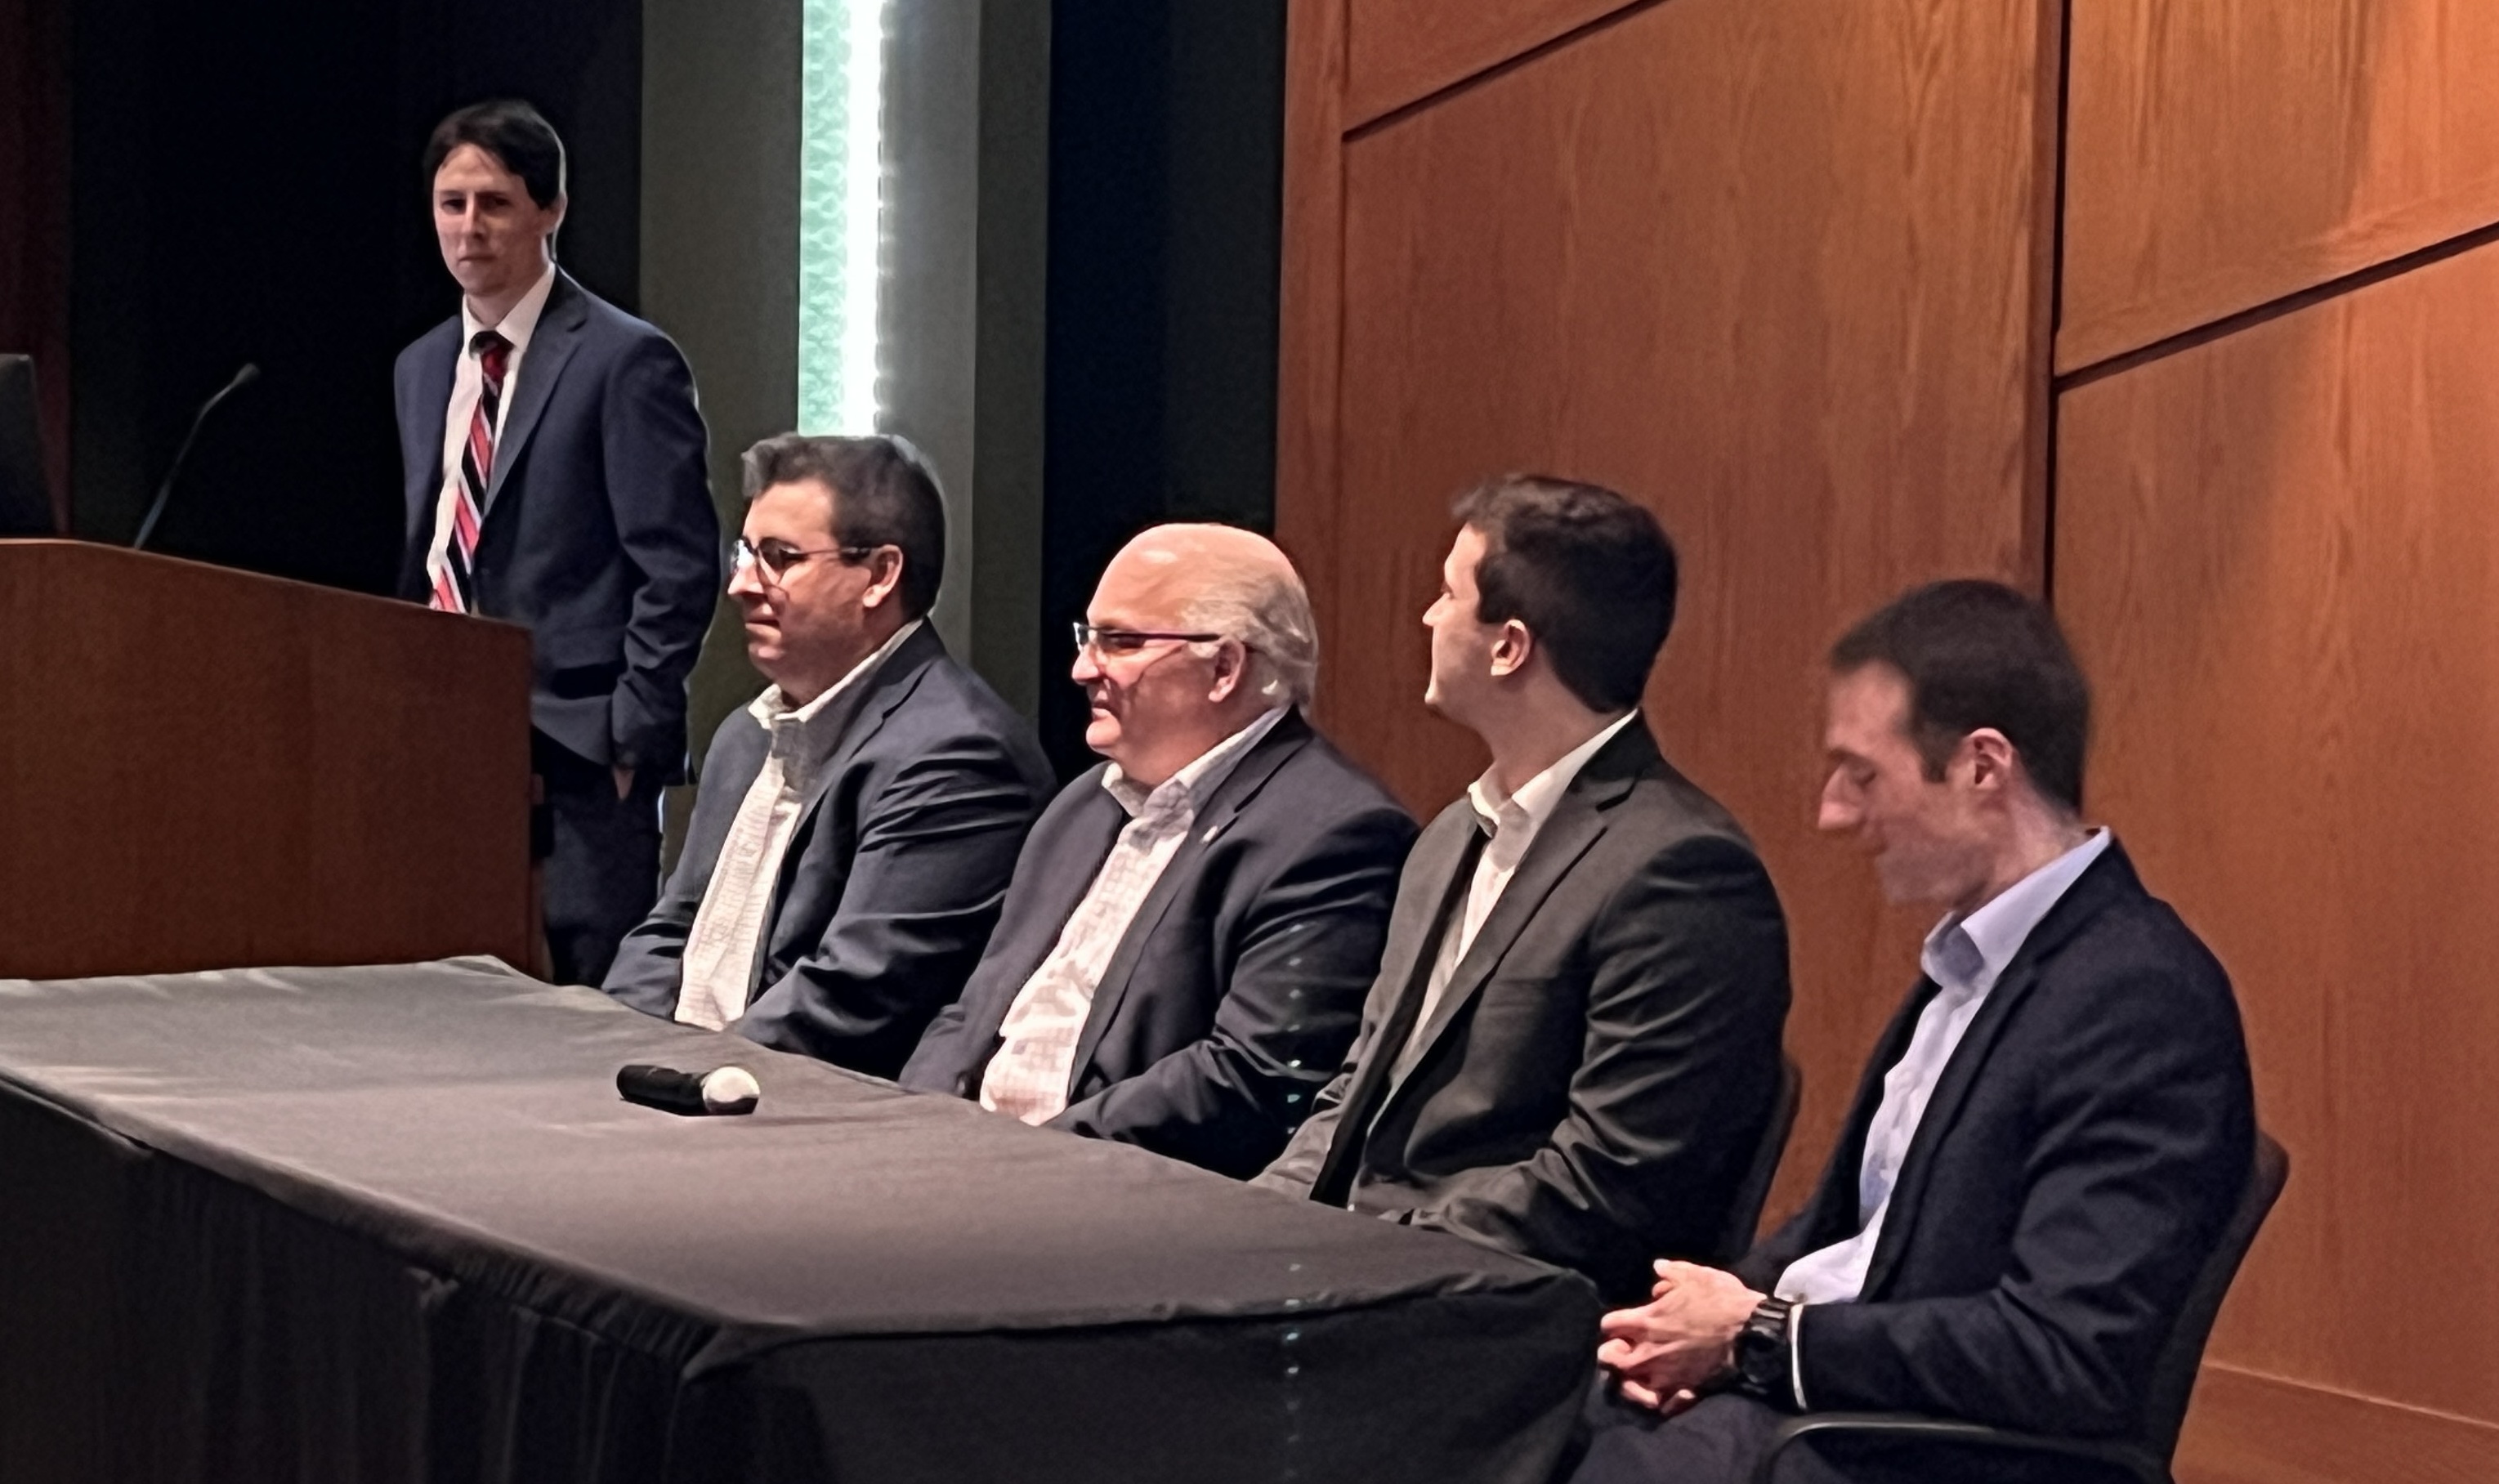 SVC panel discussion with Federated Hermes emphasizes data science’s role in asset management